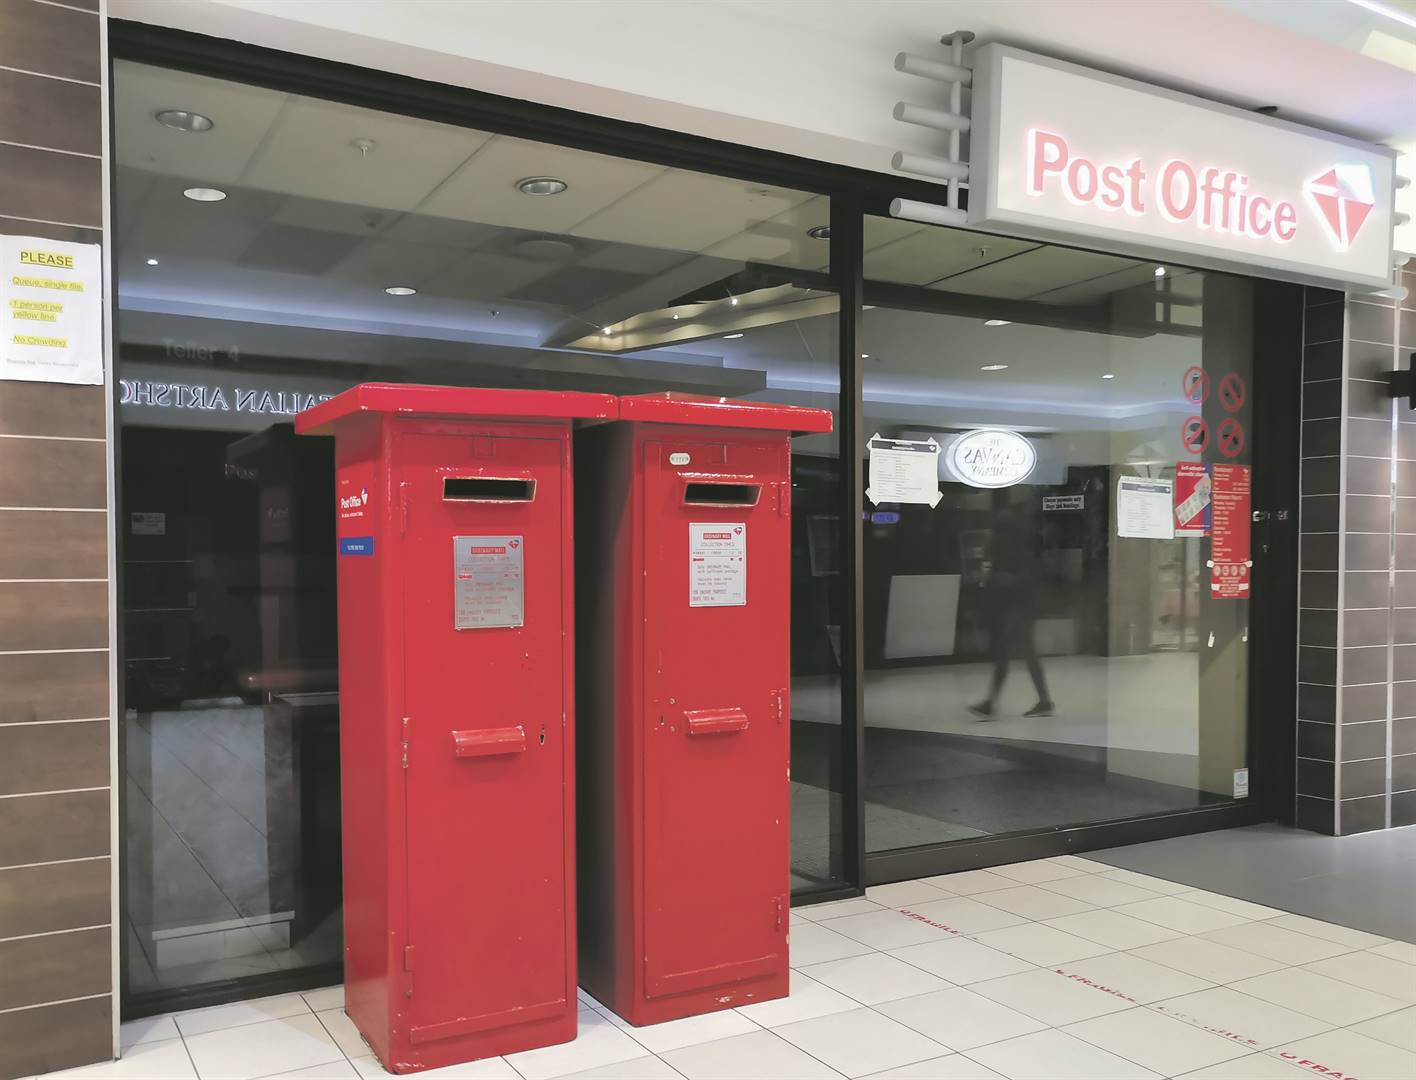 The SA Post Office is in desperate need of key policy shifts to become a viable enterprise again